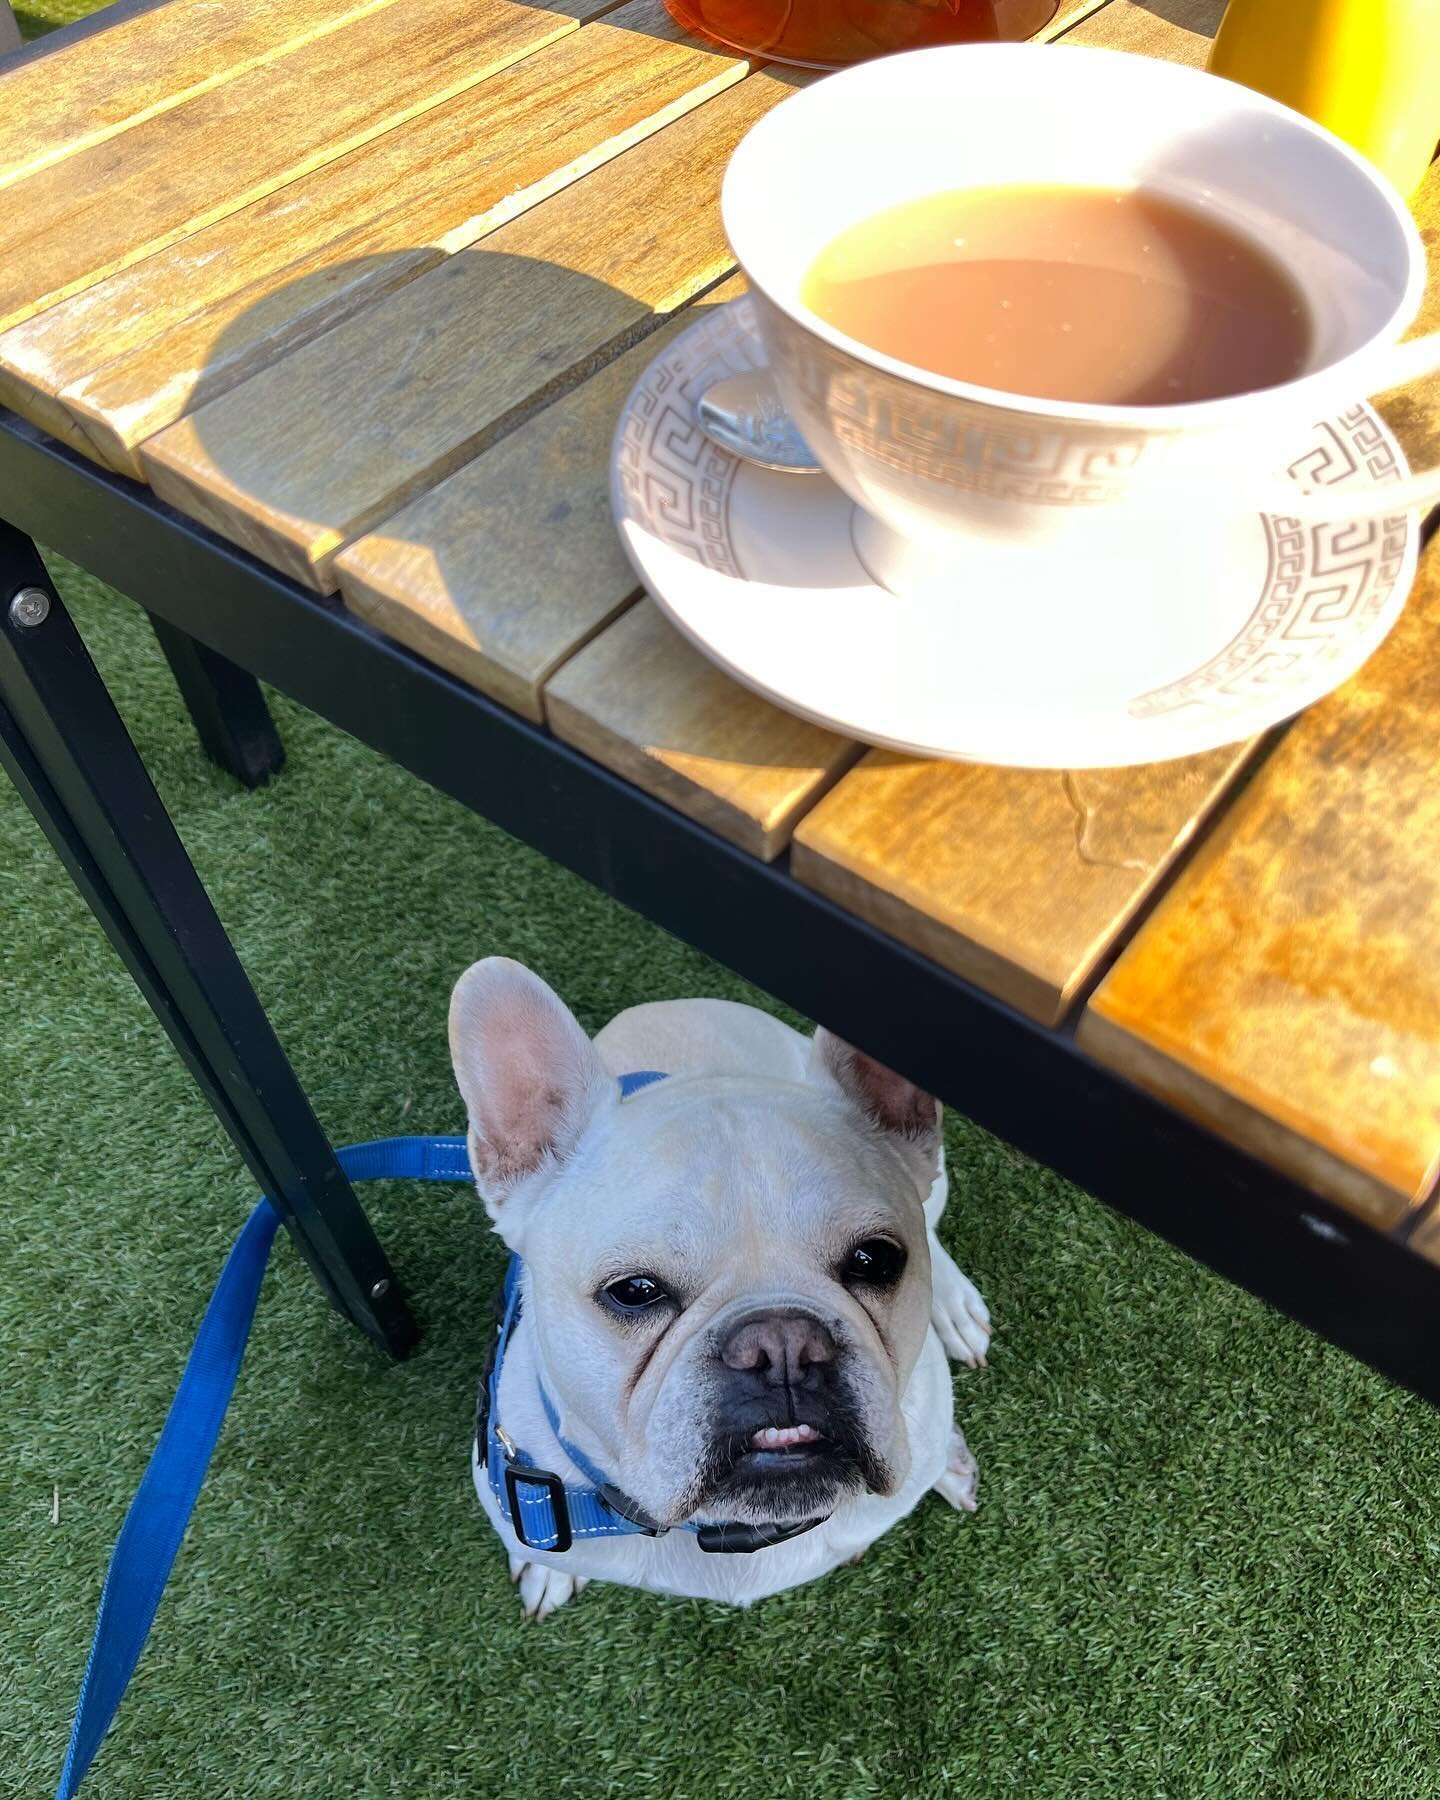 Sometimes you just need a sneaky cup of tea in the sun with your bestie🐾🐾🐾. #l-theanine #tealife #focus #concentration #healthylife #brainfood #naturopath #health